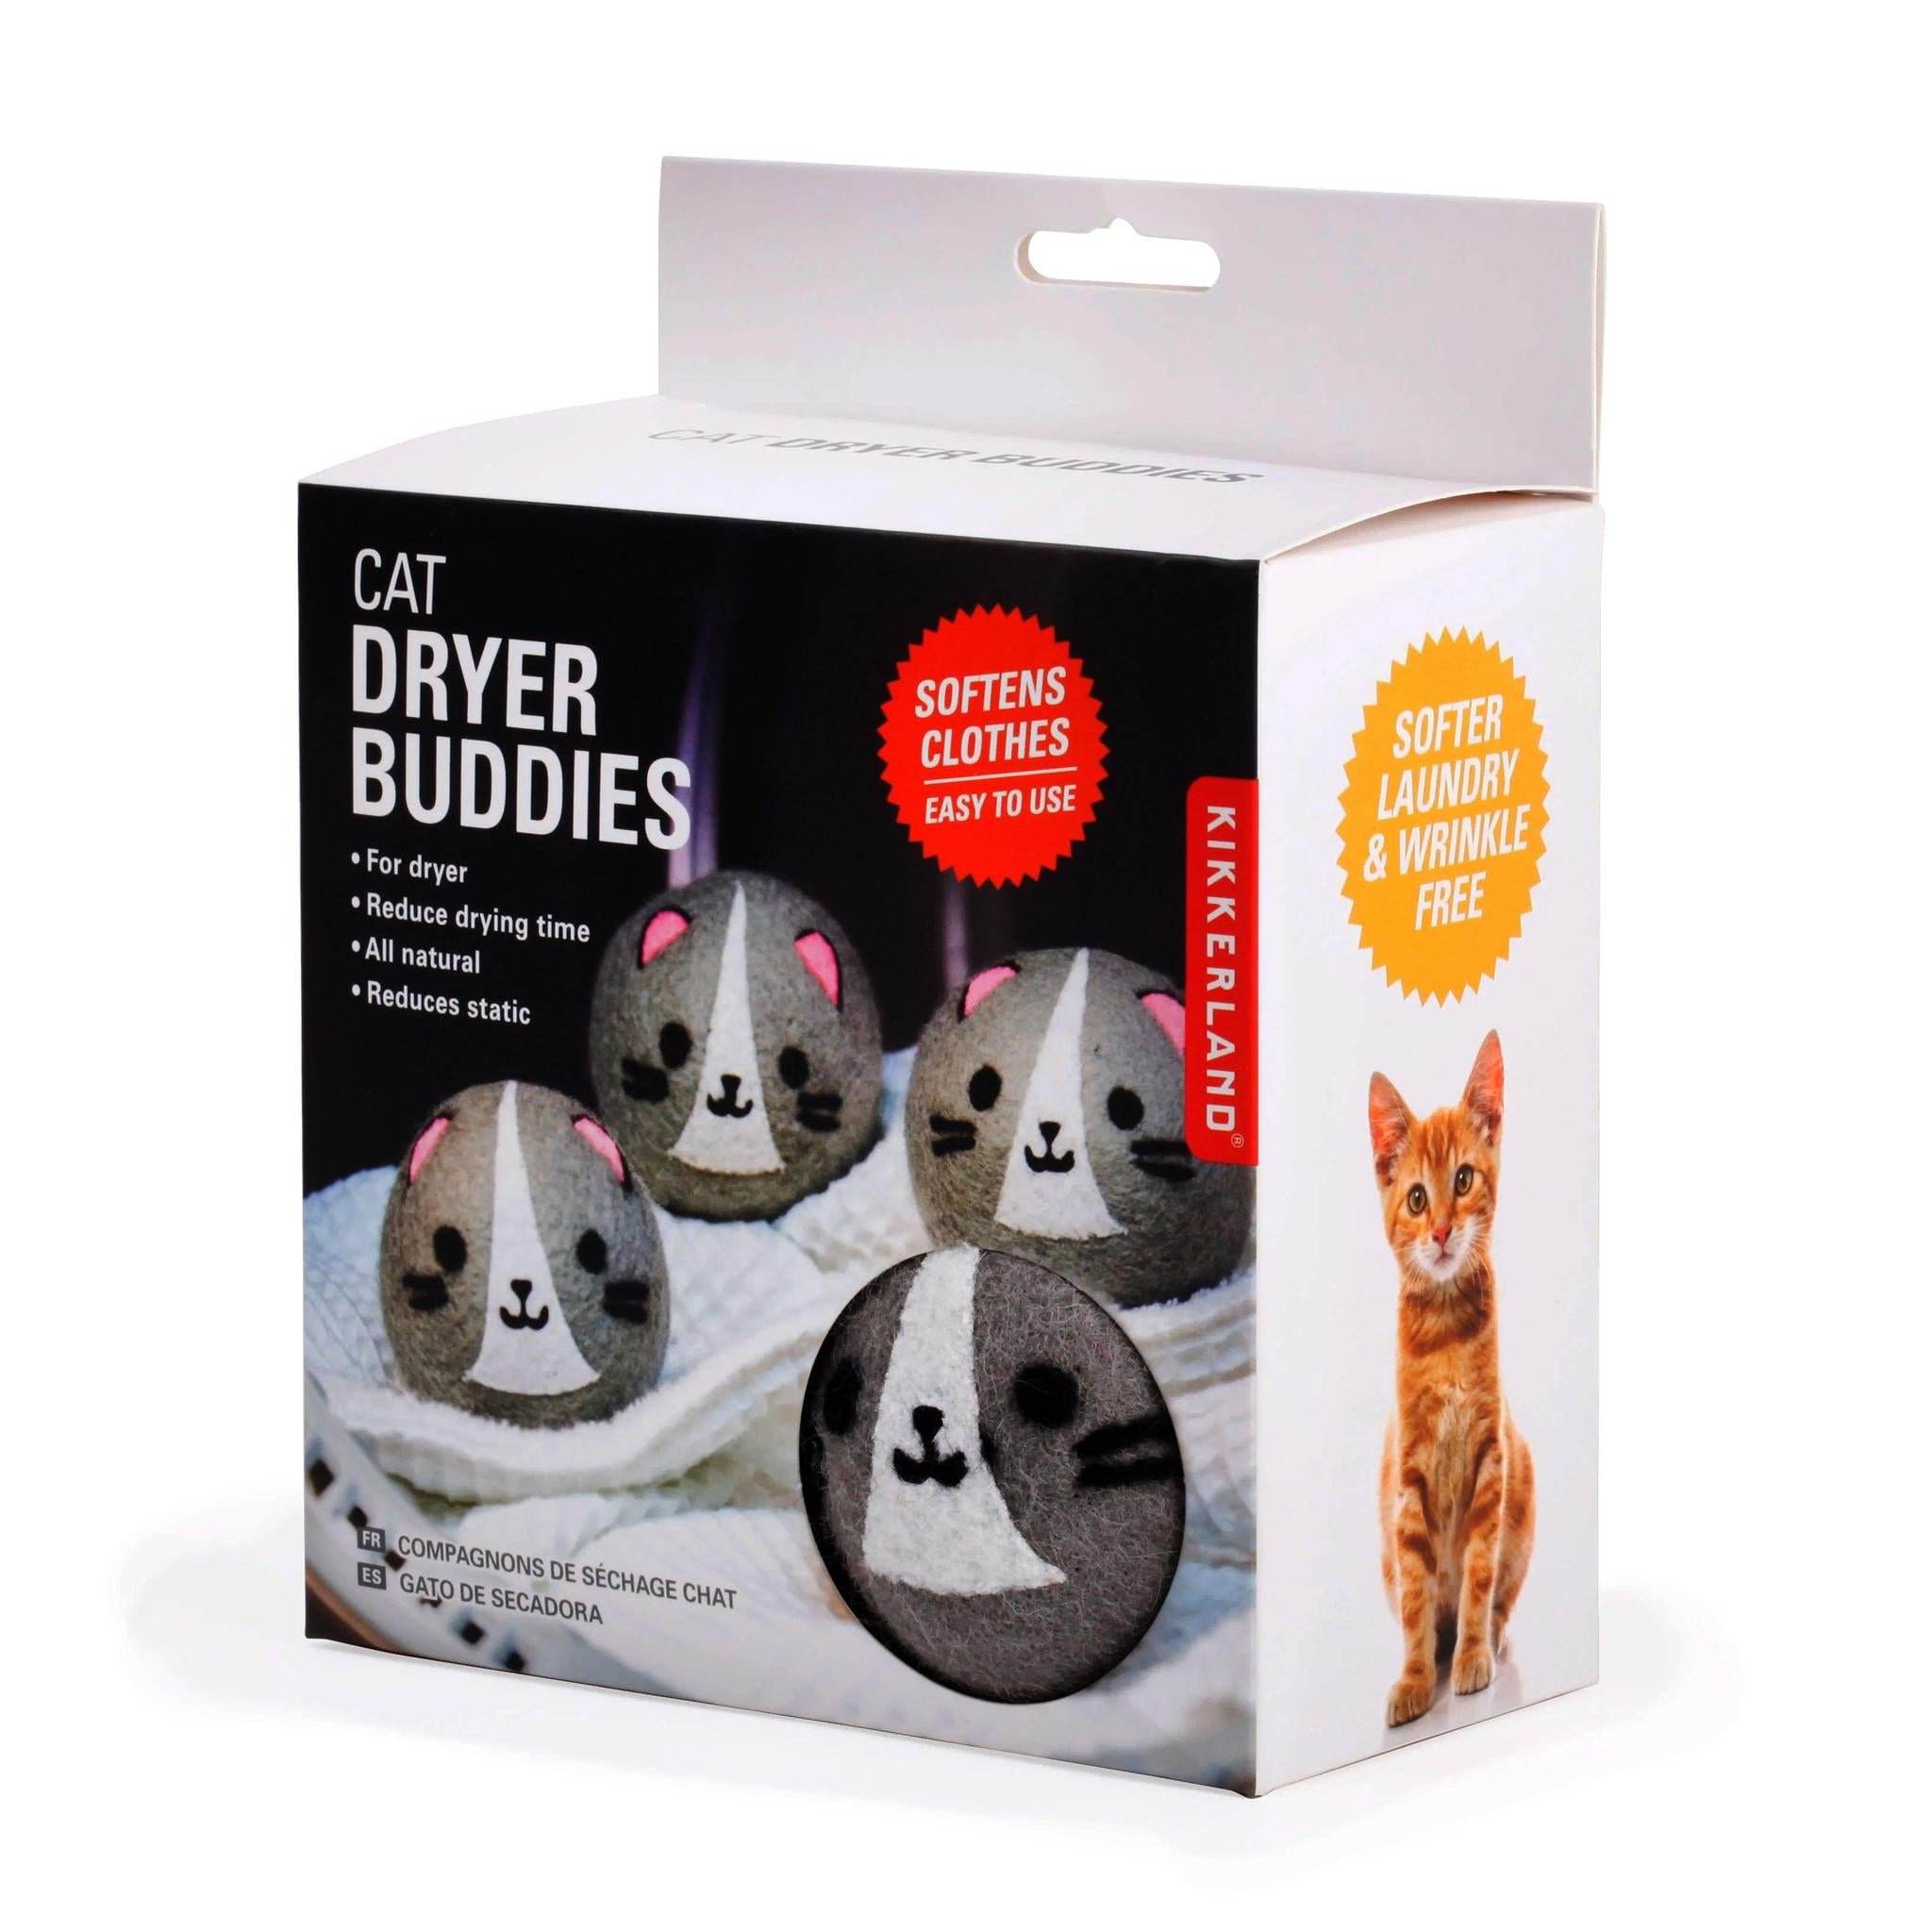 Cat Dryer Buddies: 4 Purr-fect Wool Laundry Balls for Eco-Friendly, Soft, and Wrinkle-Free Clothes!